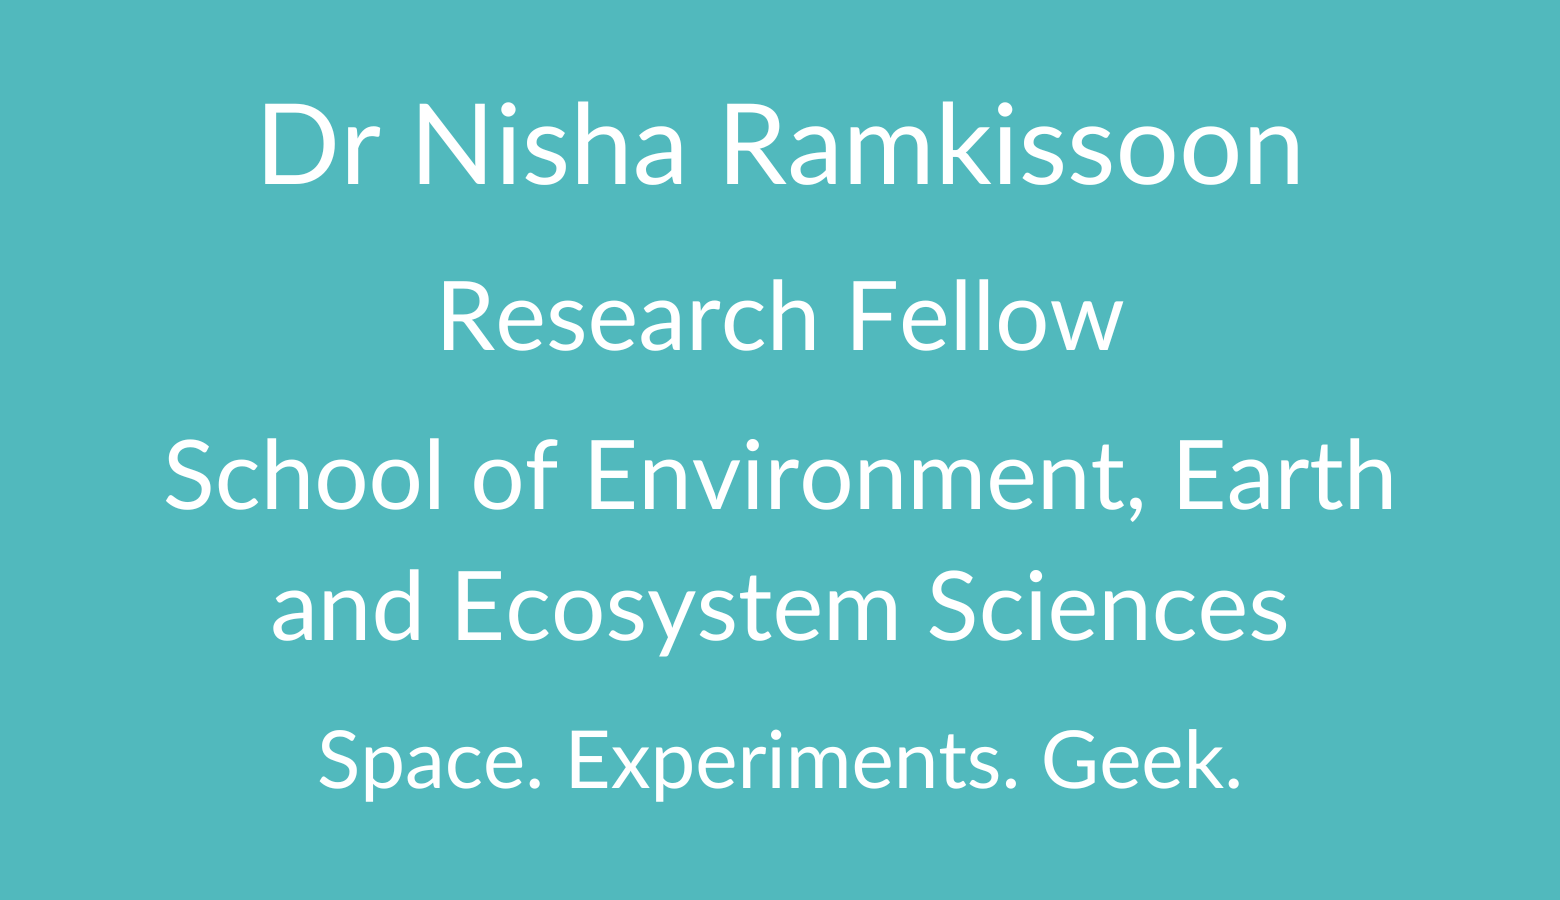 Dr Nisha Ramkissoon. Senior Fellow. School of Environment, Earth and Ecosystem Sciences. Space. Experiments. Geek.